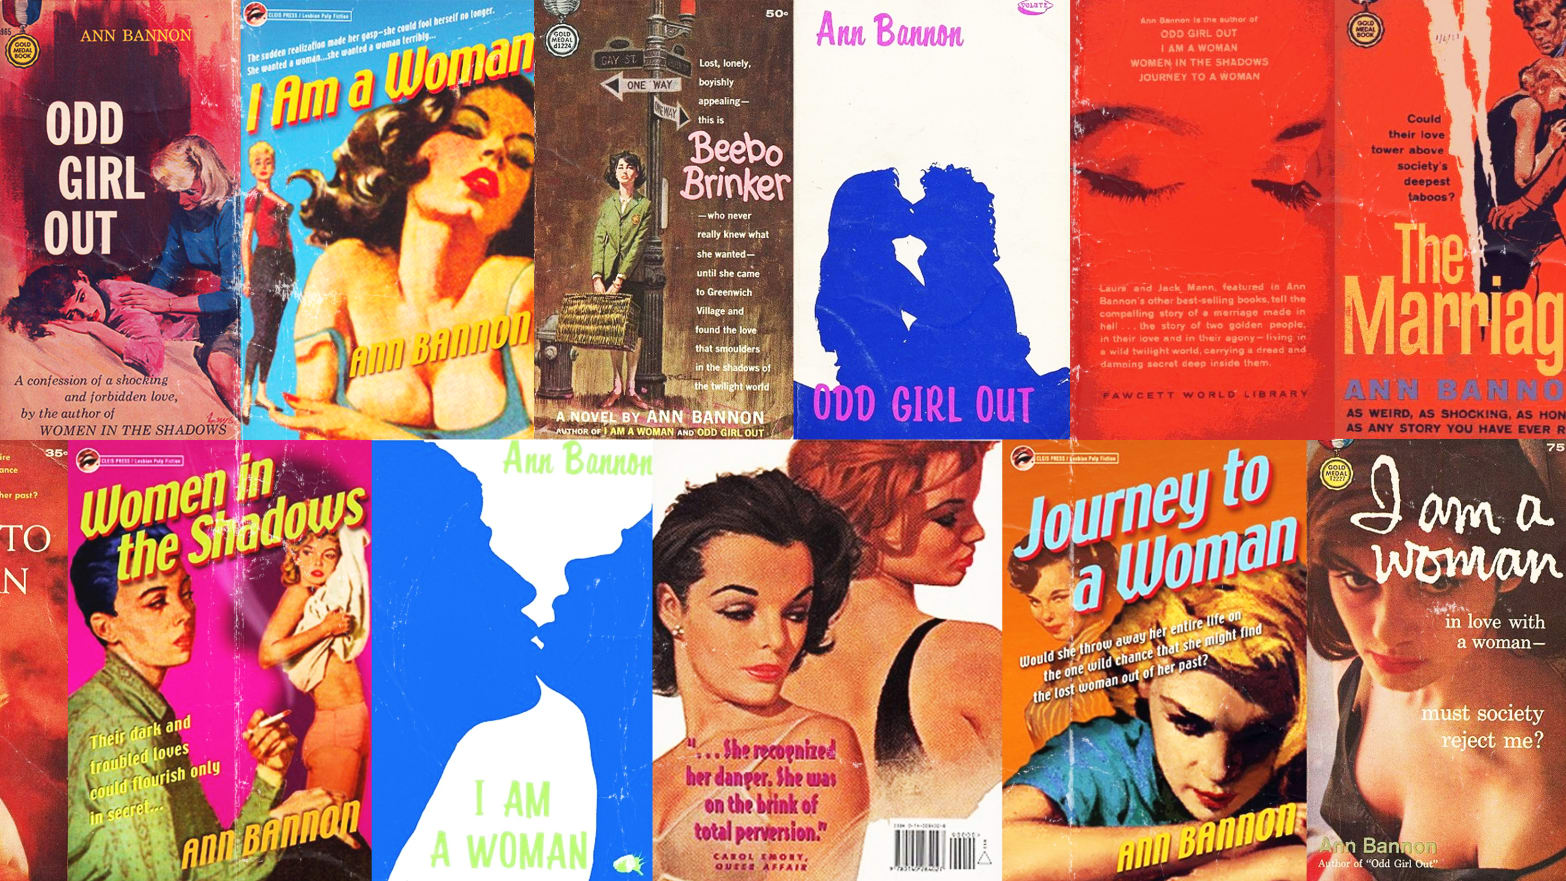 Ann Bannon, the Queen of Lesbian Pulp Fiction, Reveals Her Own Amazing Story pic